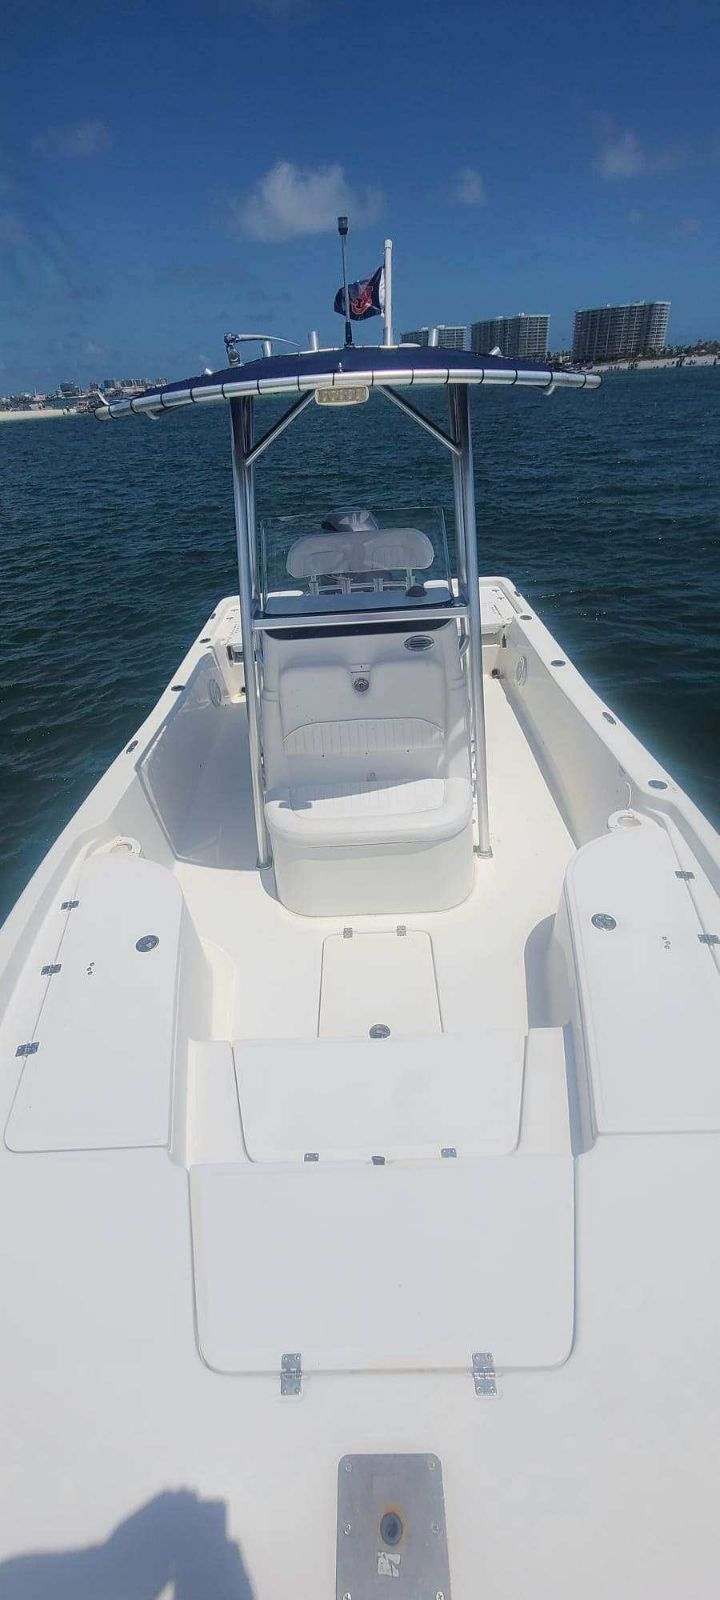 seating on a center console boat in the water